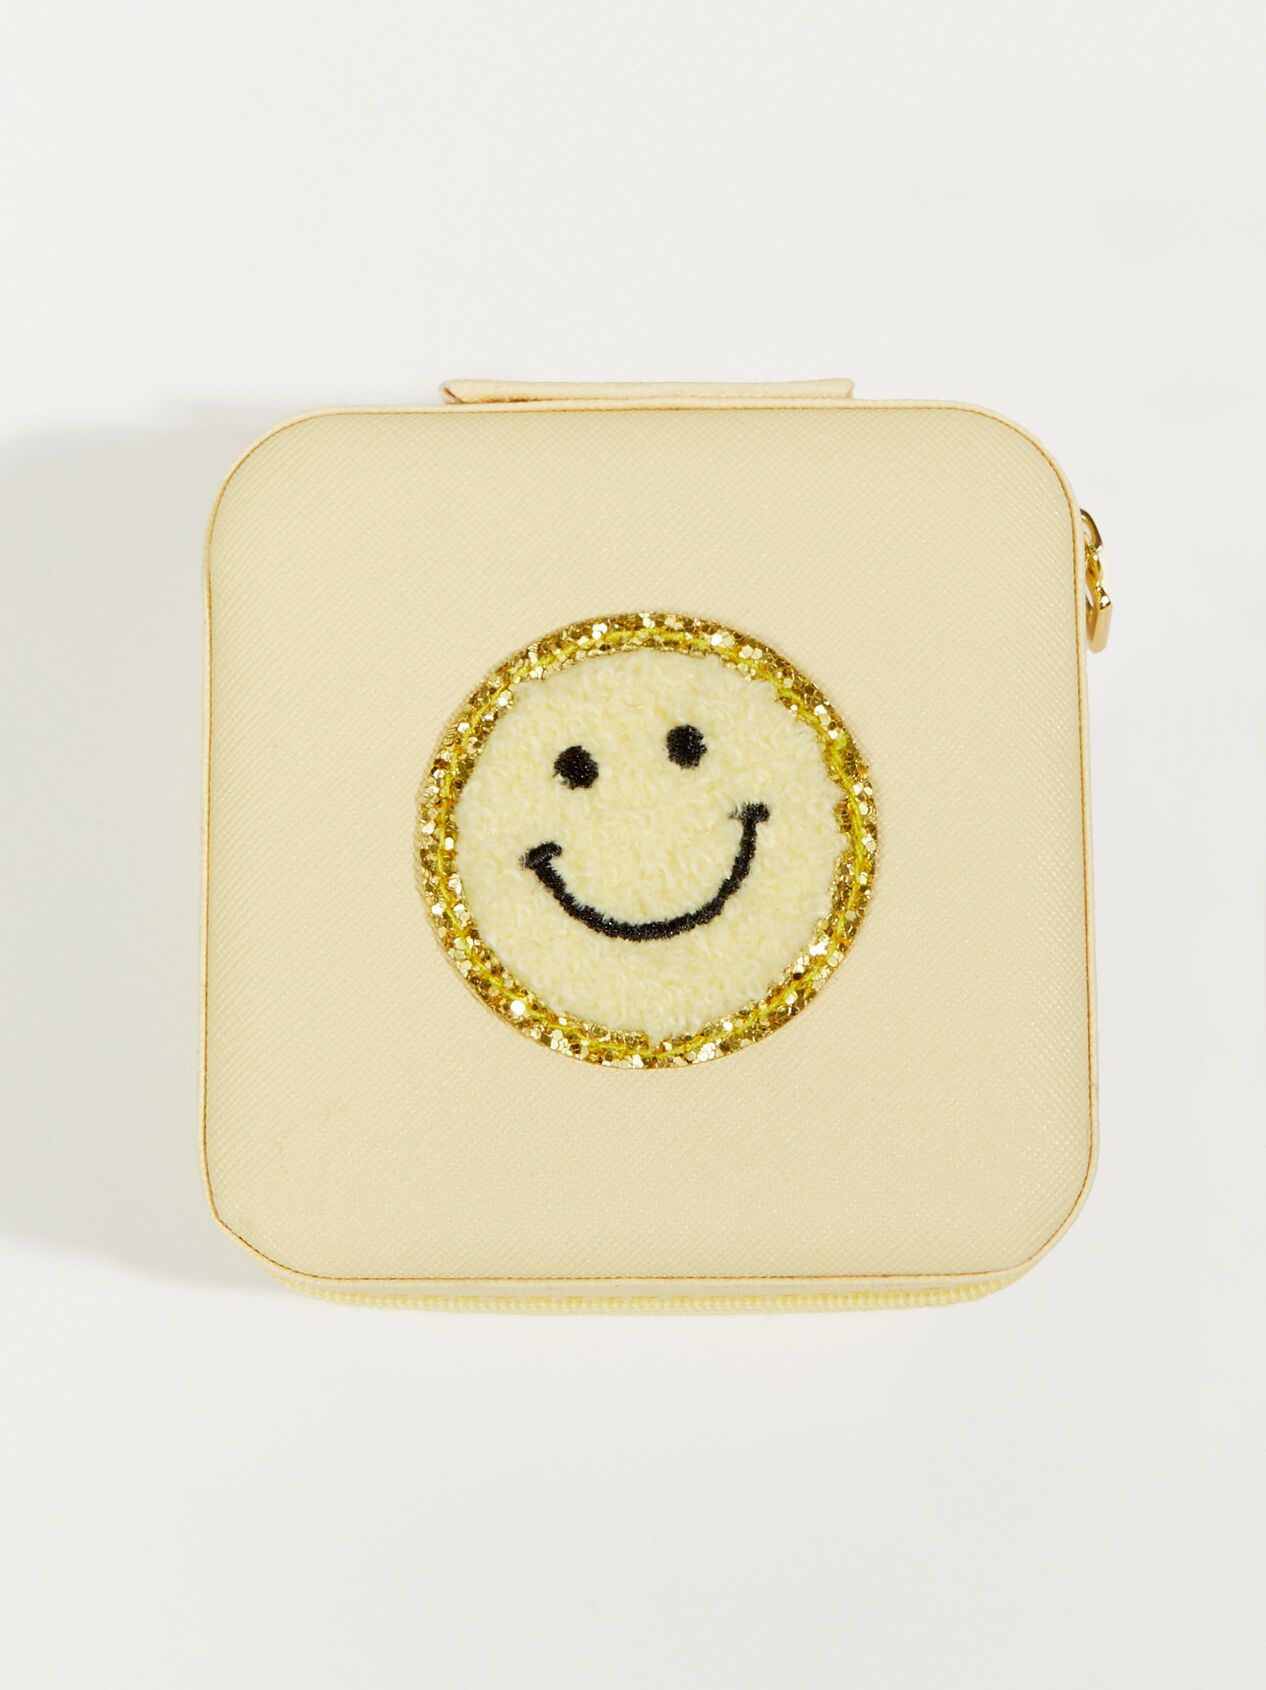 Smiley Face Jewelry Box | Altar'd State